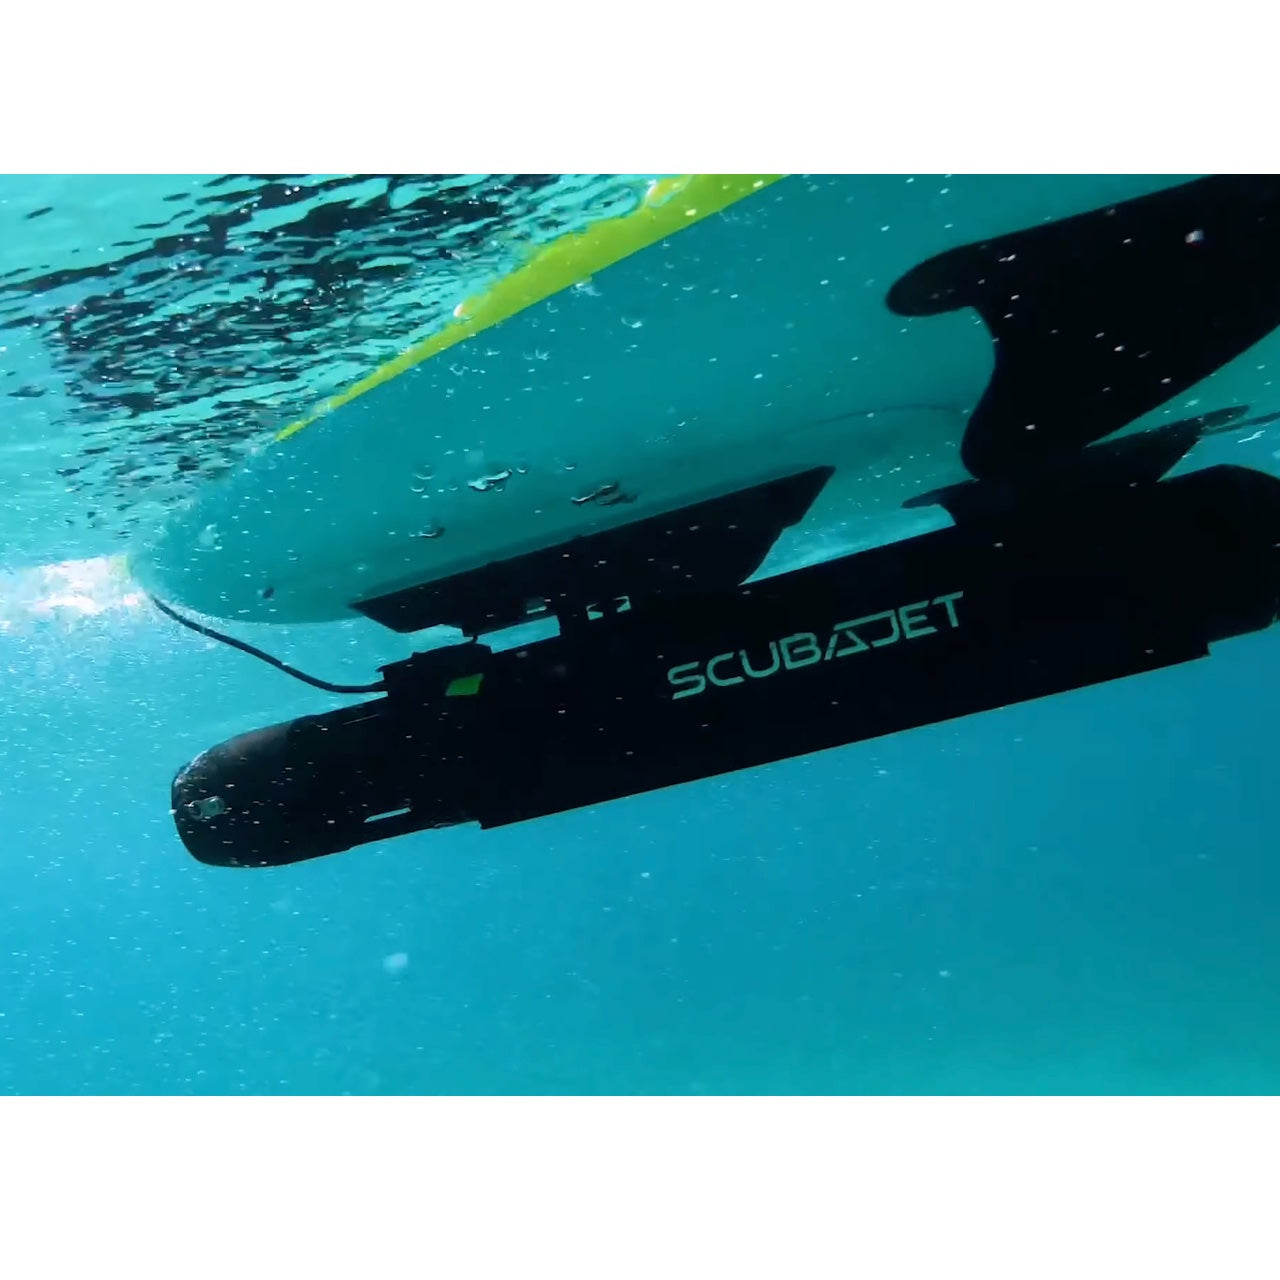 Closeup underwater view of the ScubaJet Pro Overwter Kit attached to a paddle board. The paddle board motor is ready to push the SUP through the water.